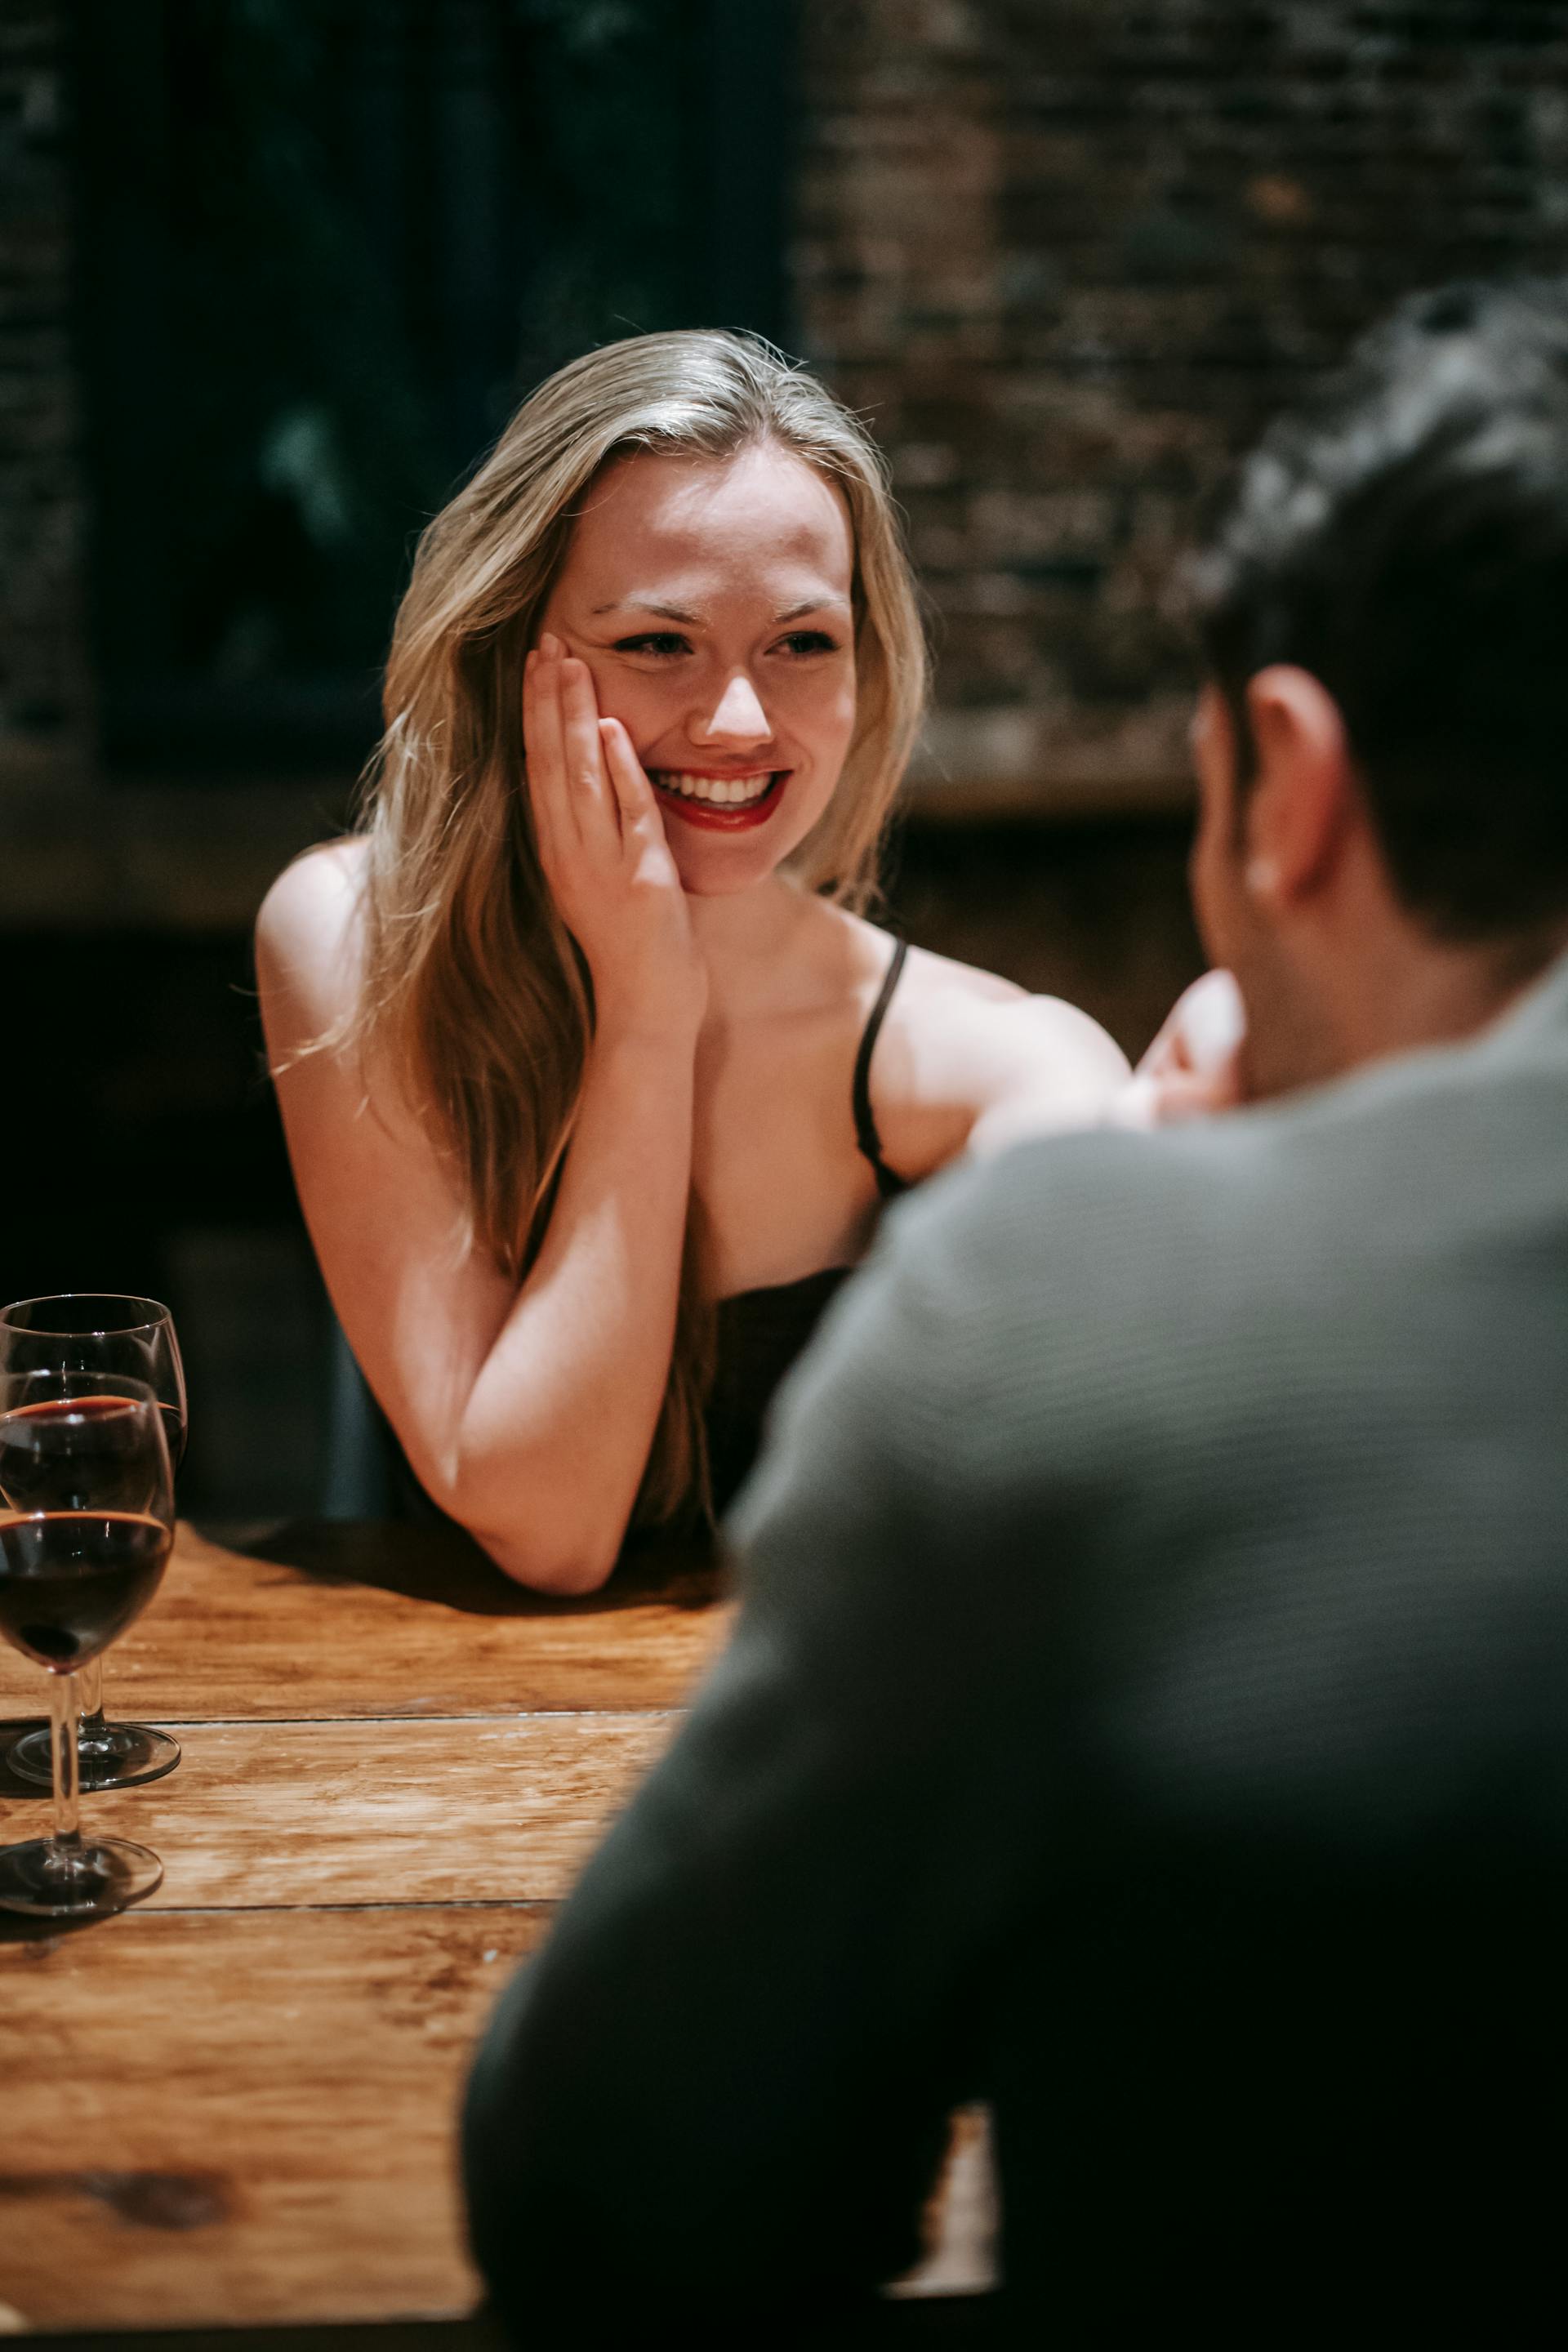 A couple having dinner together | Source: Pexels